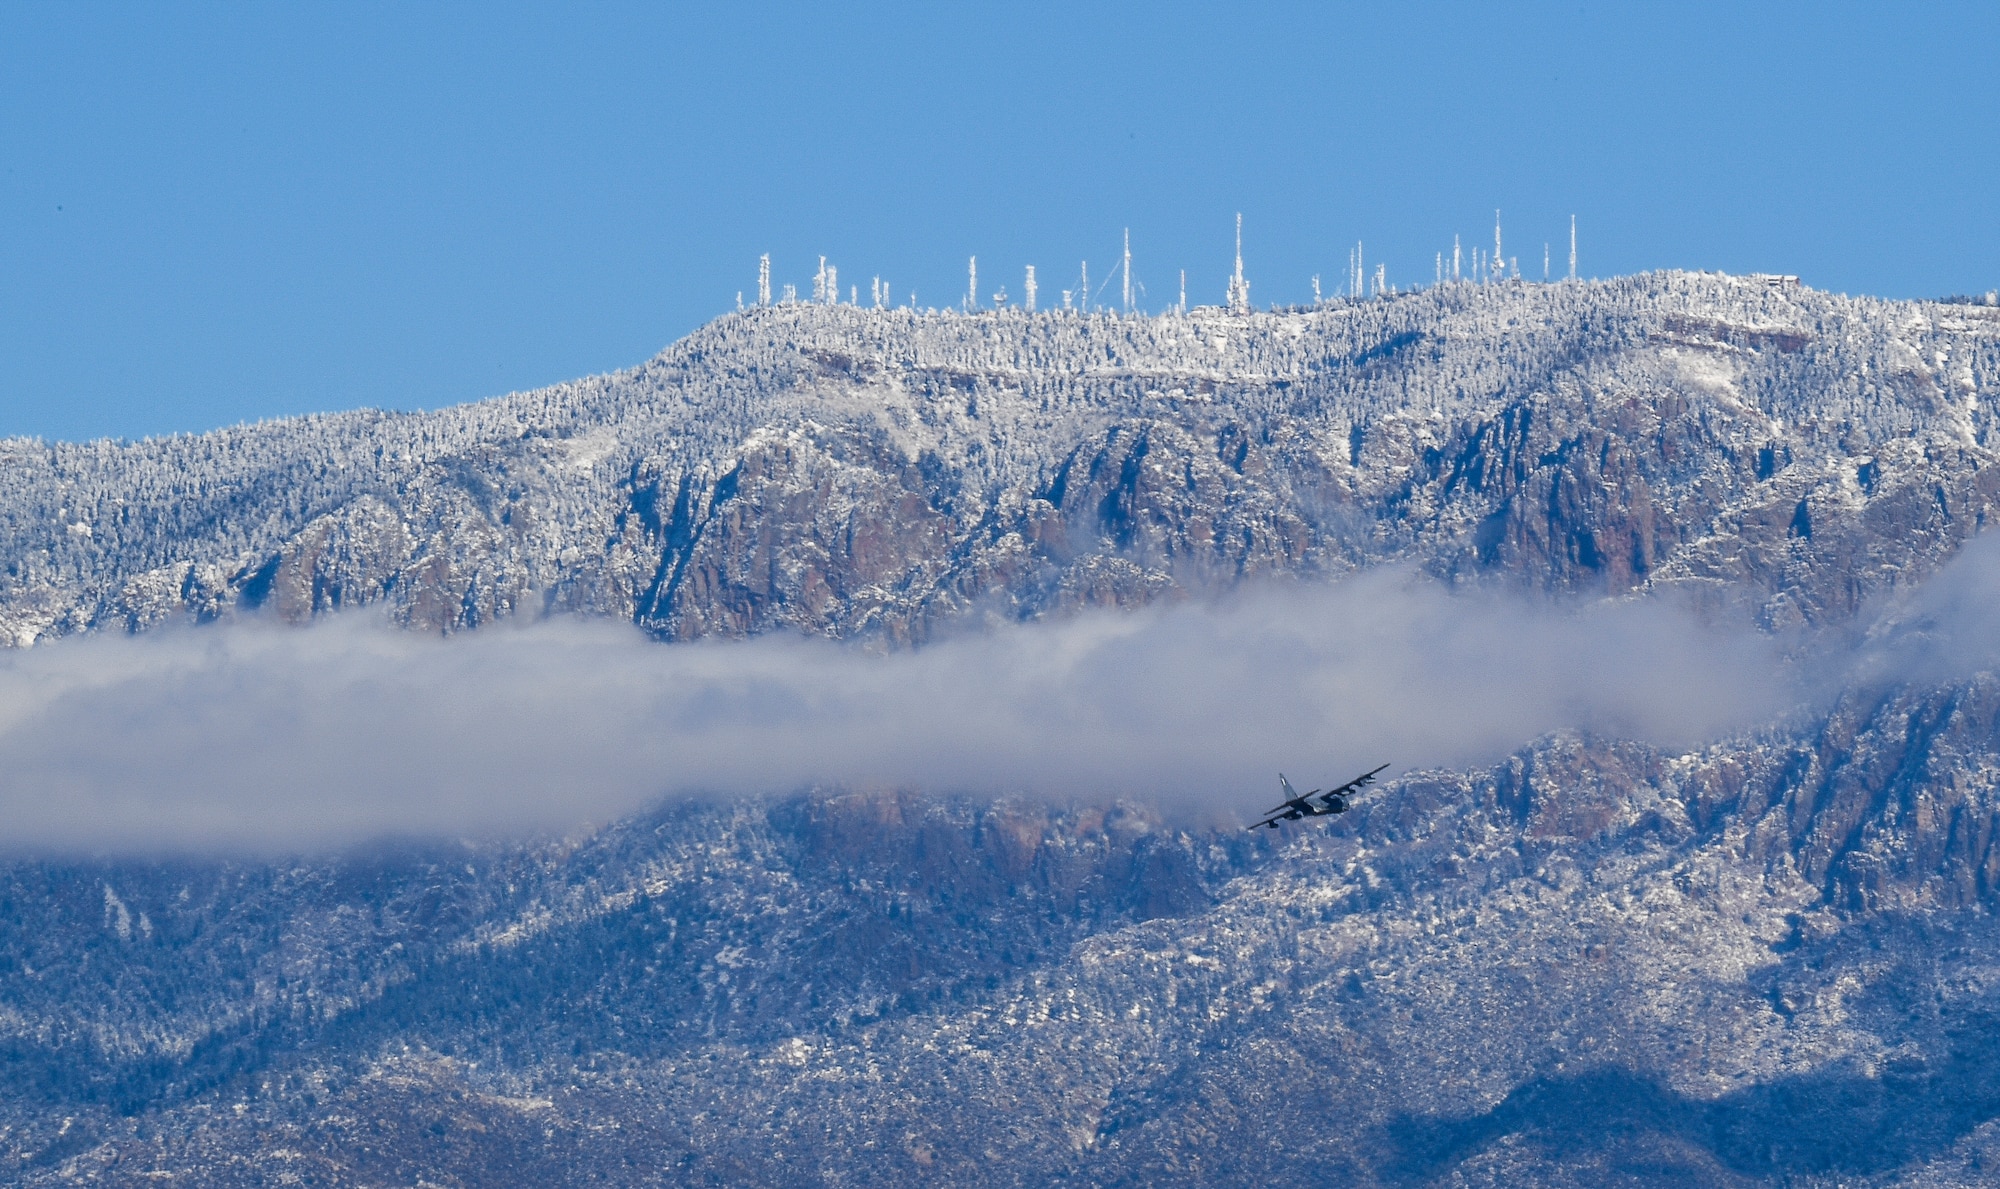 Photo of aircraft flying near mountains.